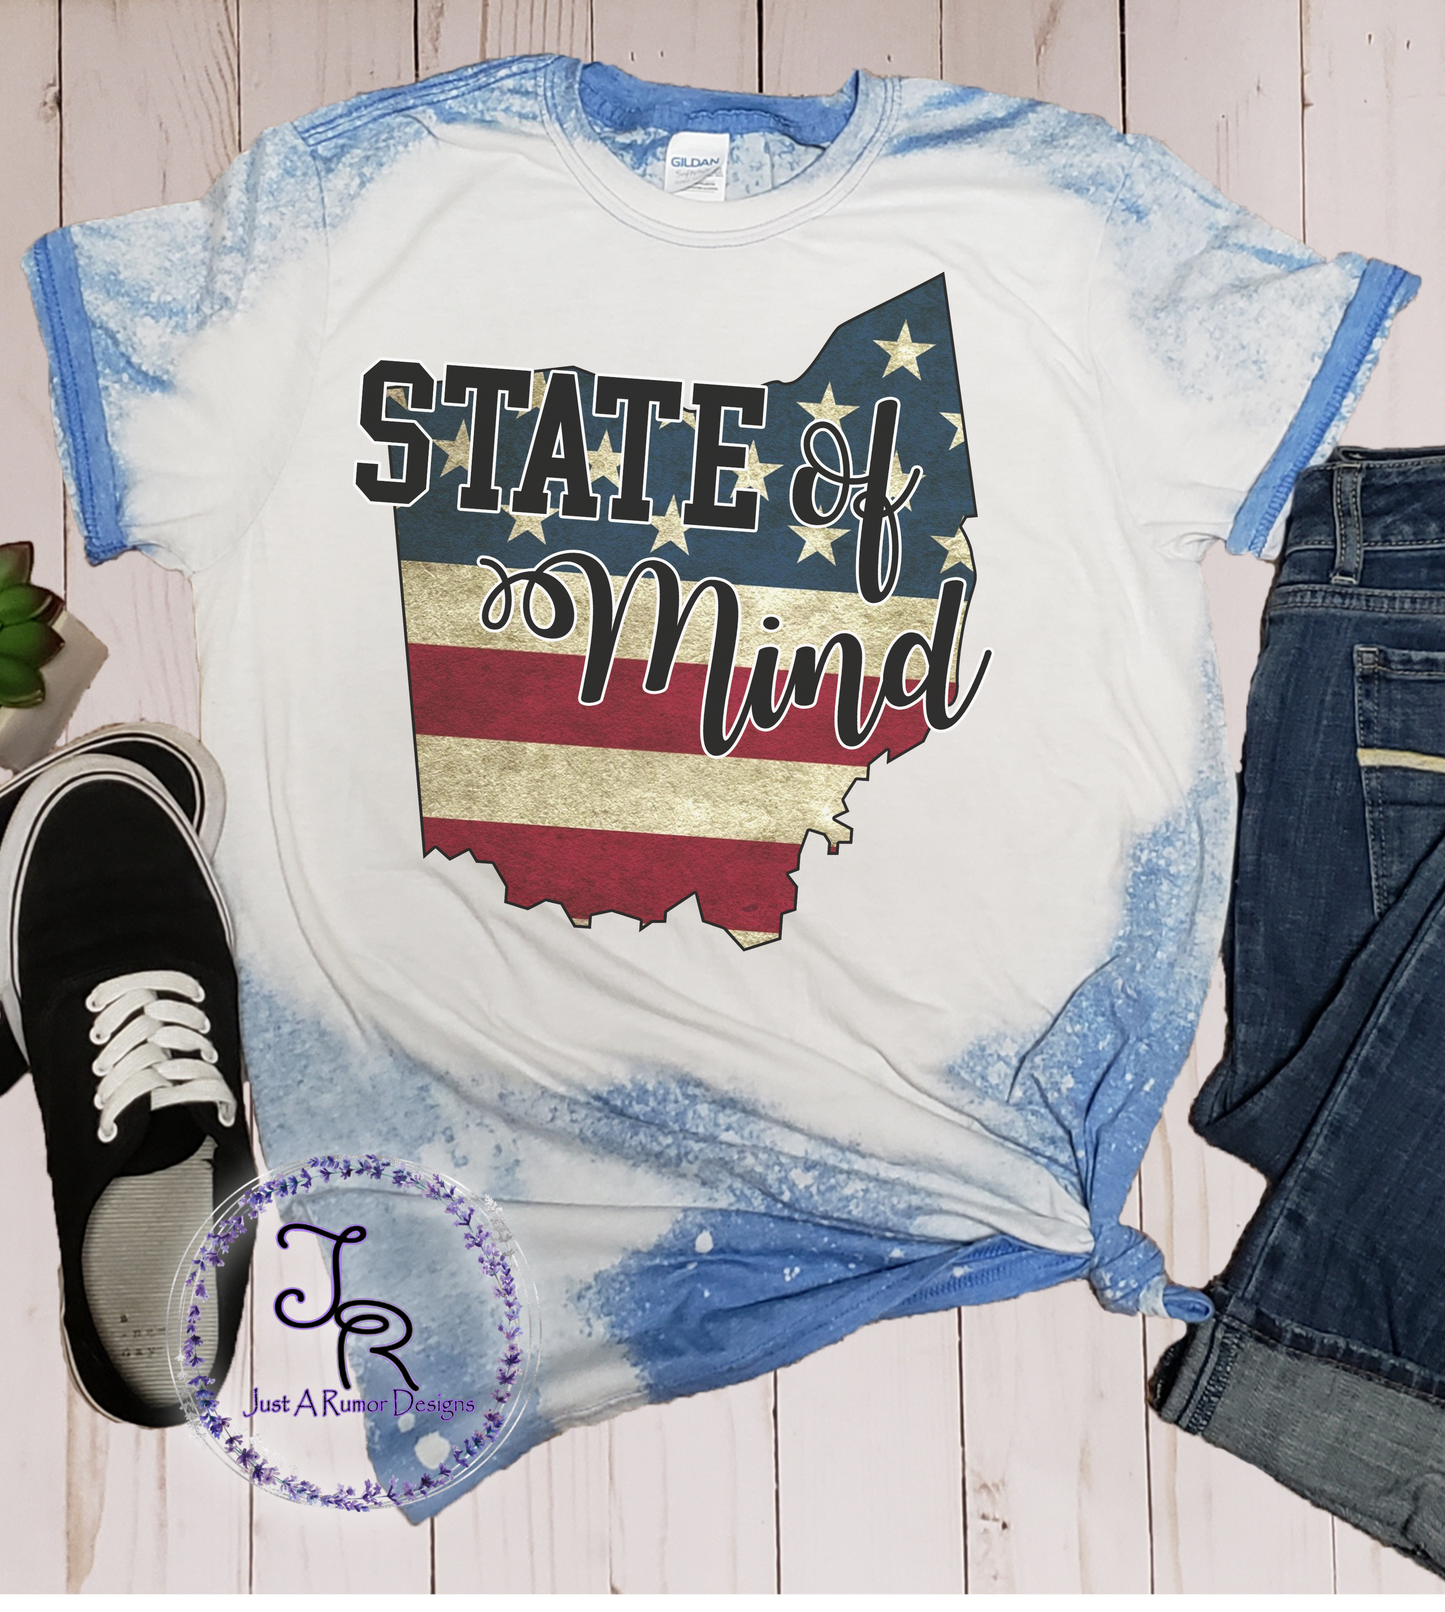 OH State of Mind Shirt